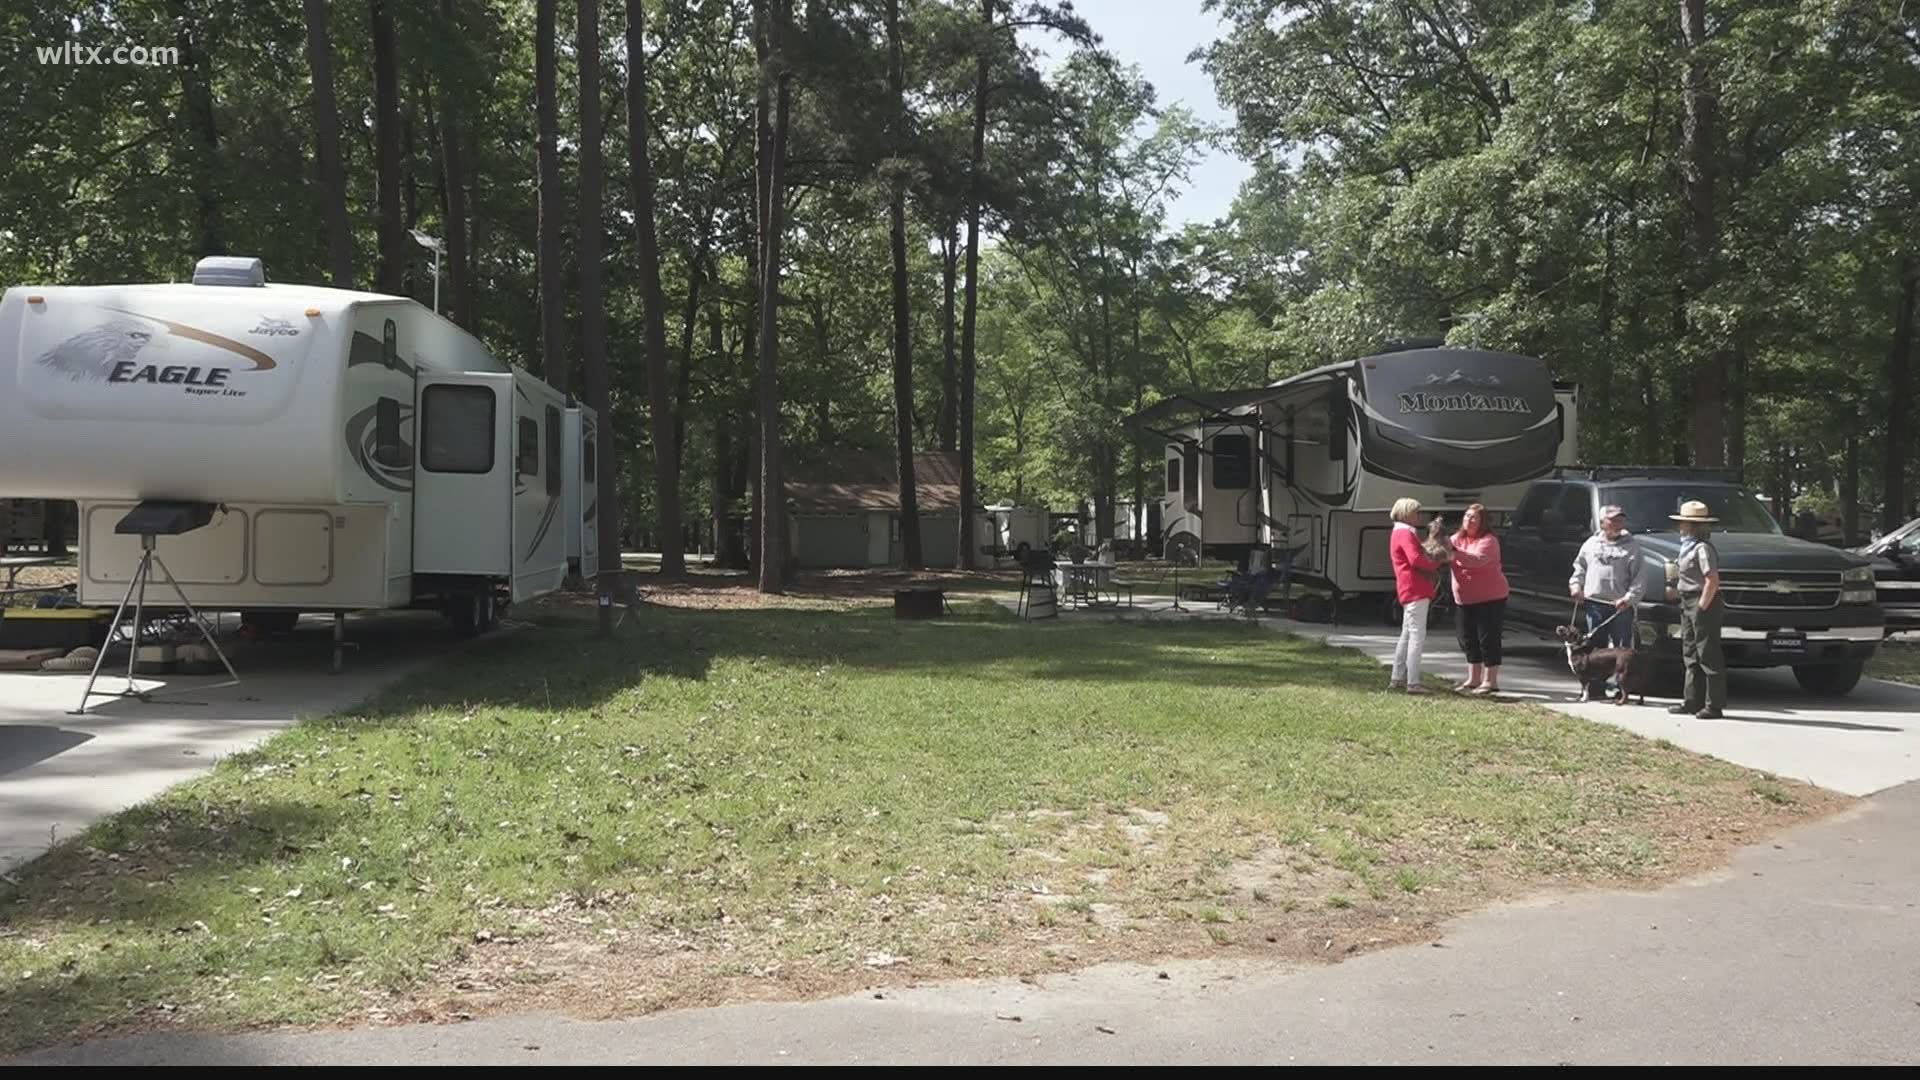 Santee State Park officials say camping has become more popular since the pandemic began.